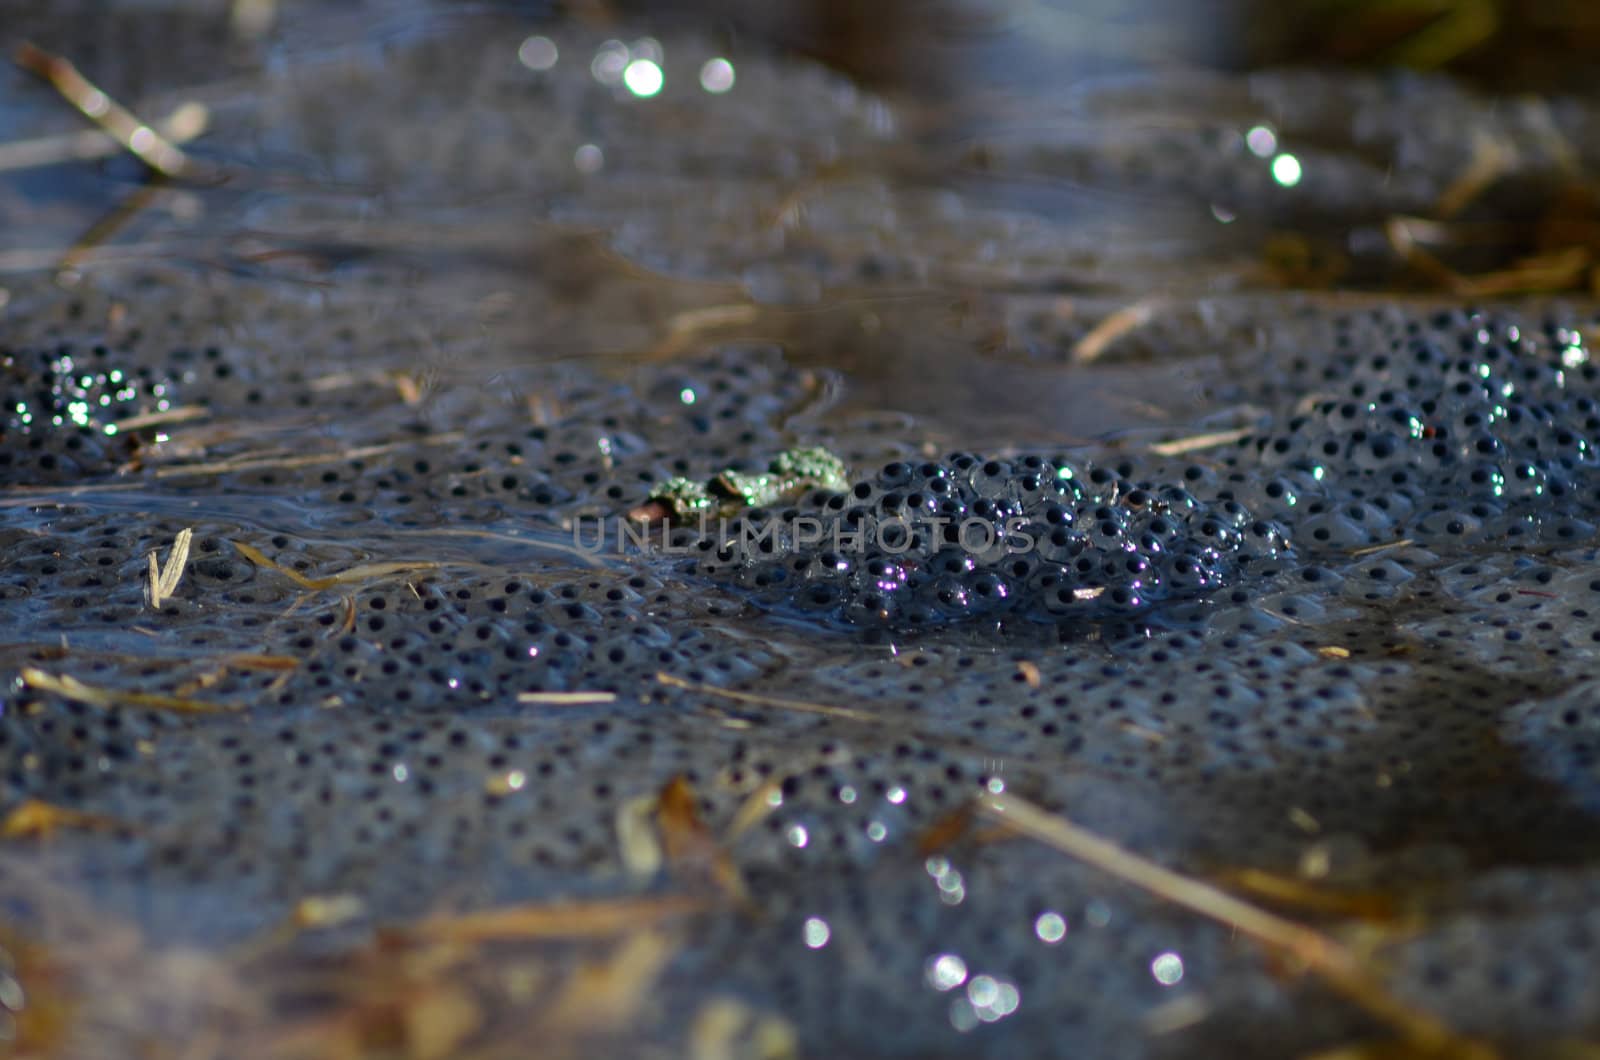 Frog spawn by Mbatelier